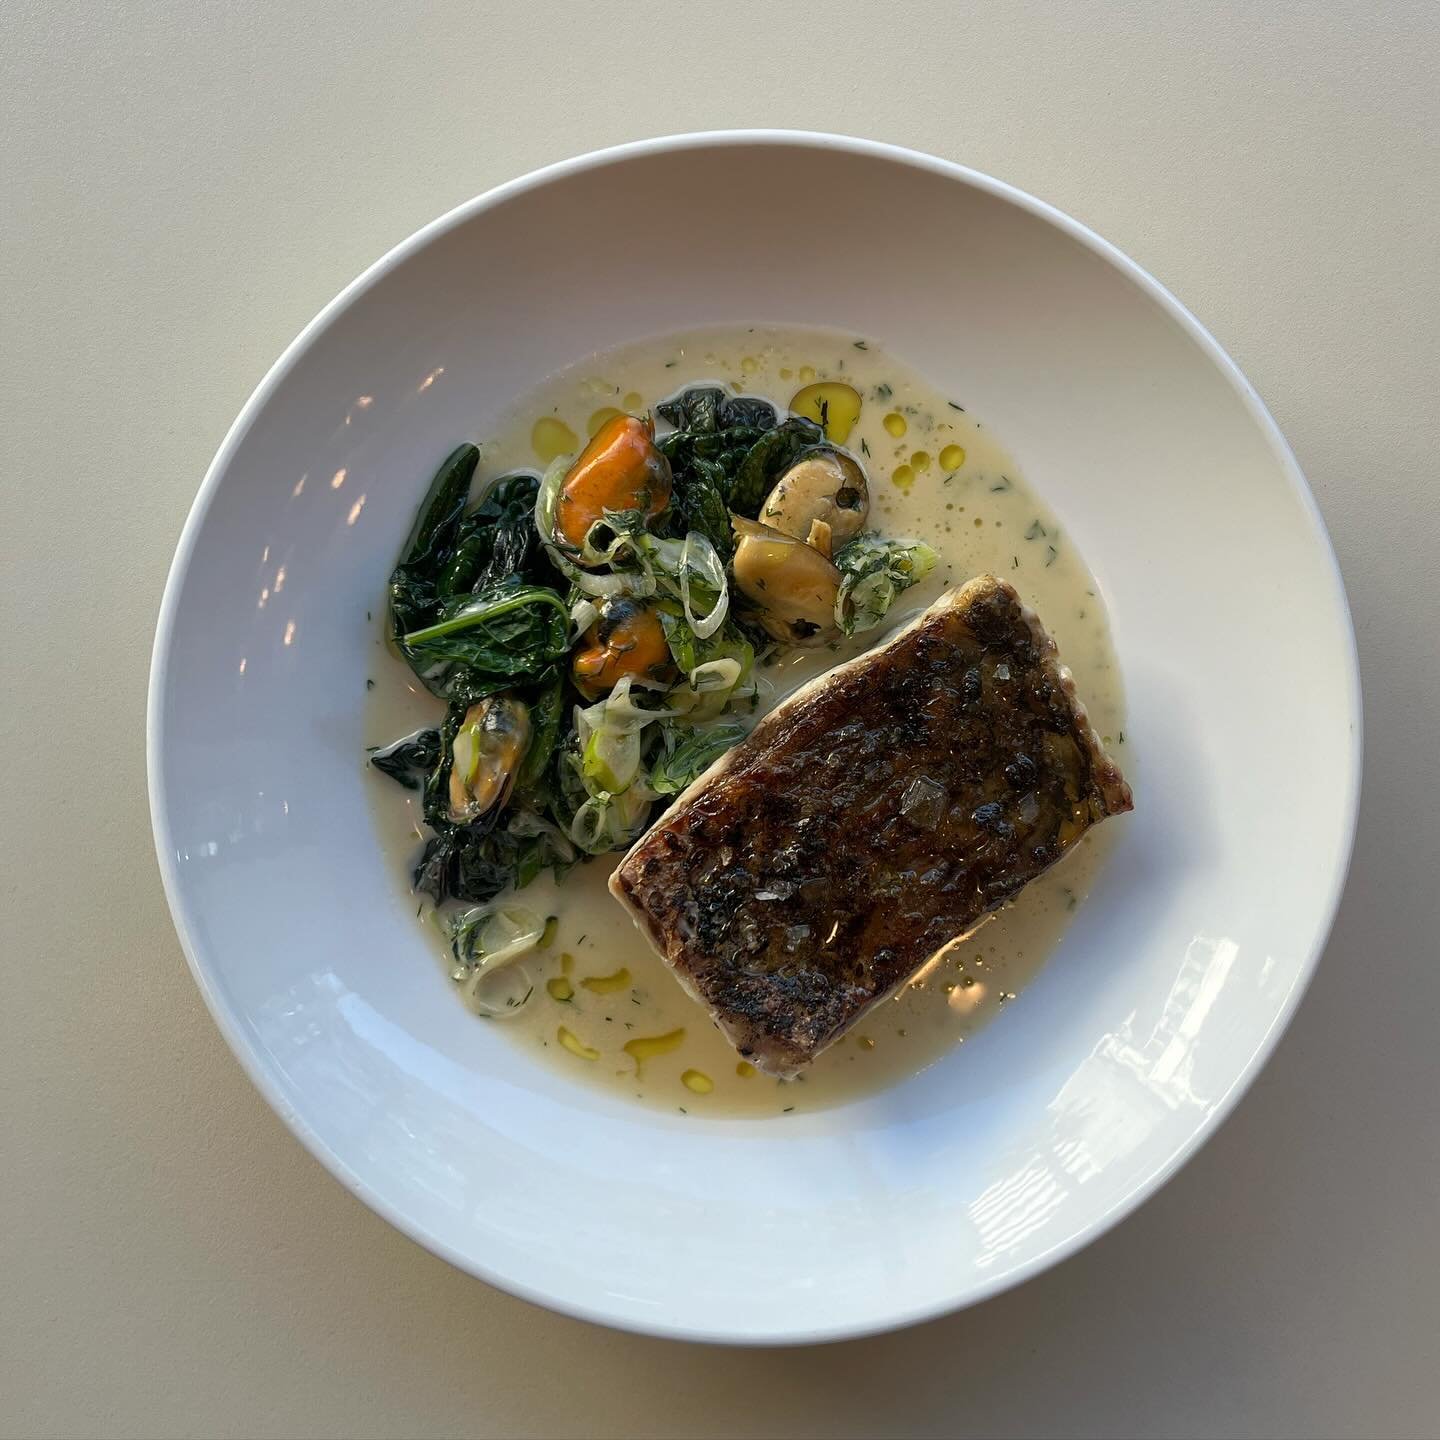 New&rsquo;ish in the menu. Crispy skinned sea bass , cooked over the coals sitting alongside charred mustard leaves and dashi steamed mussels in a dill spiked mussel sauce.